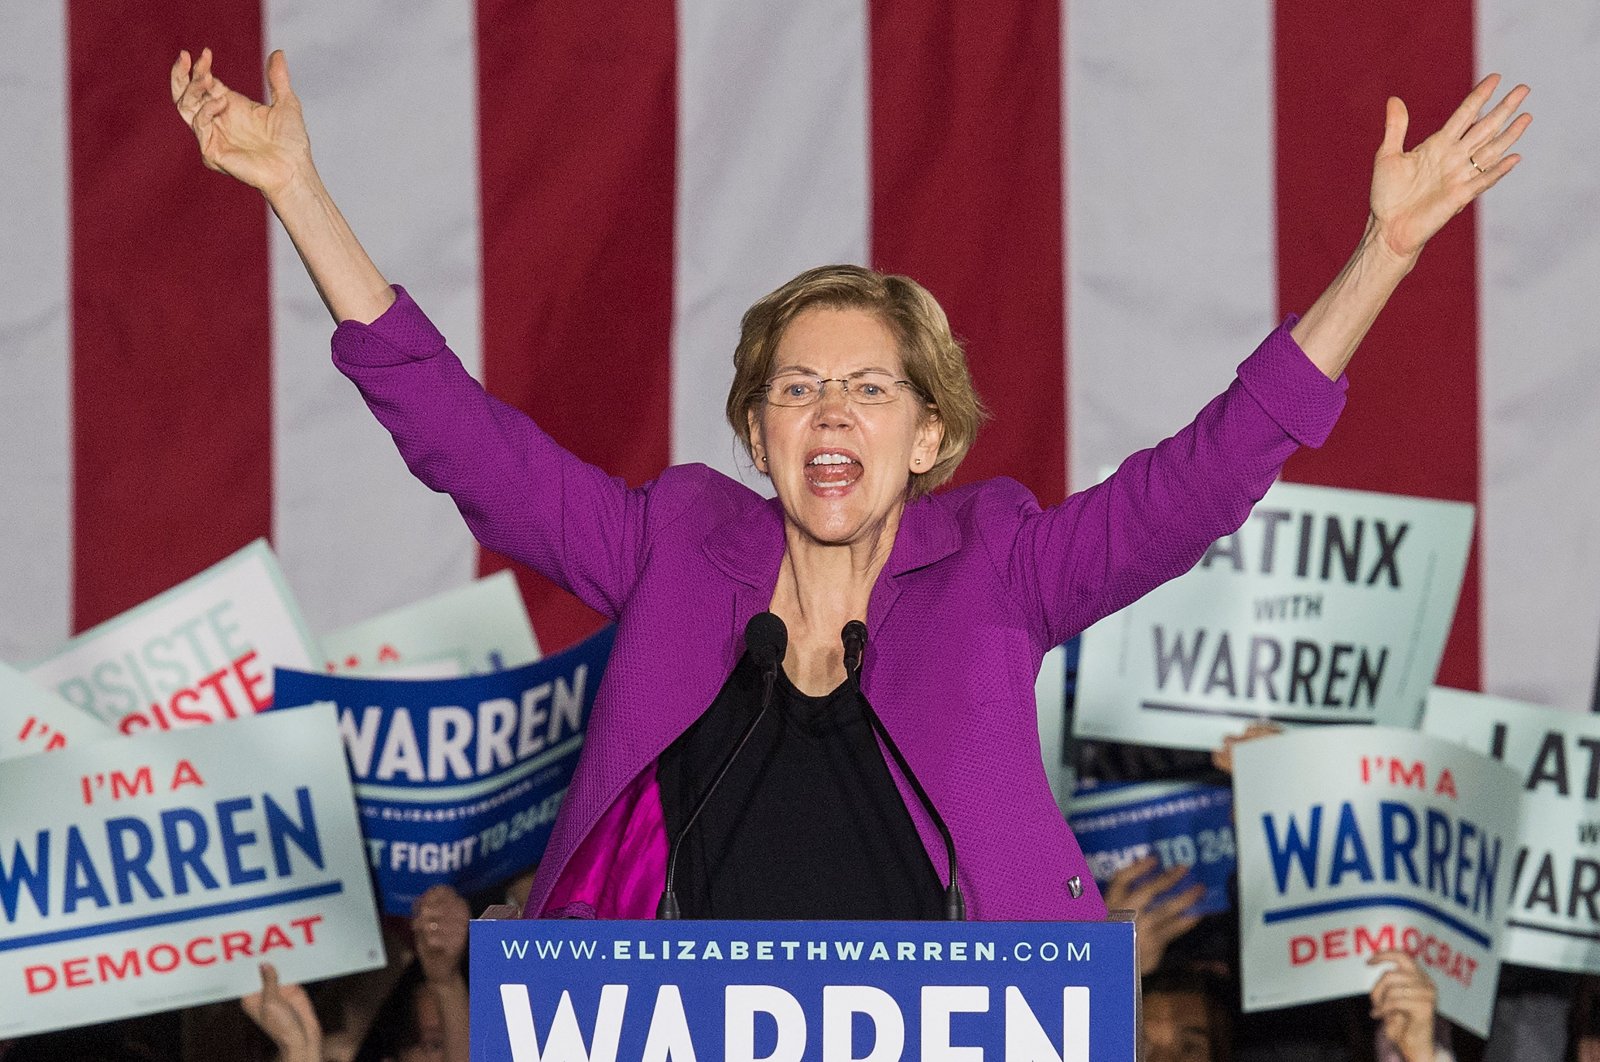 Democratic White House hopeful Massachusetts Senator Elizabeth Warren speaks to her supporters during a campaign rally on the eve of the California Democratic Primary in Monterey Park, east of Los Angeles, C.A., March 2, 2020. (AFP Photo)